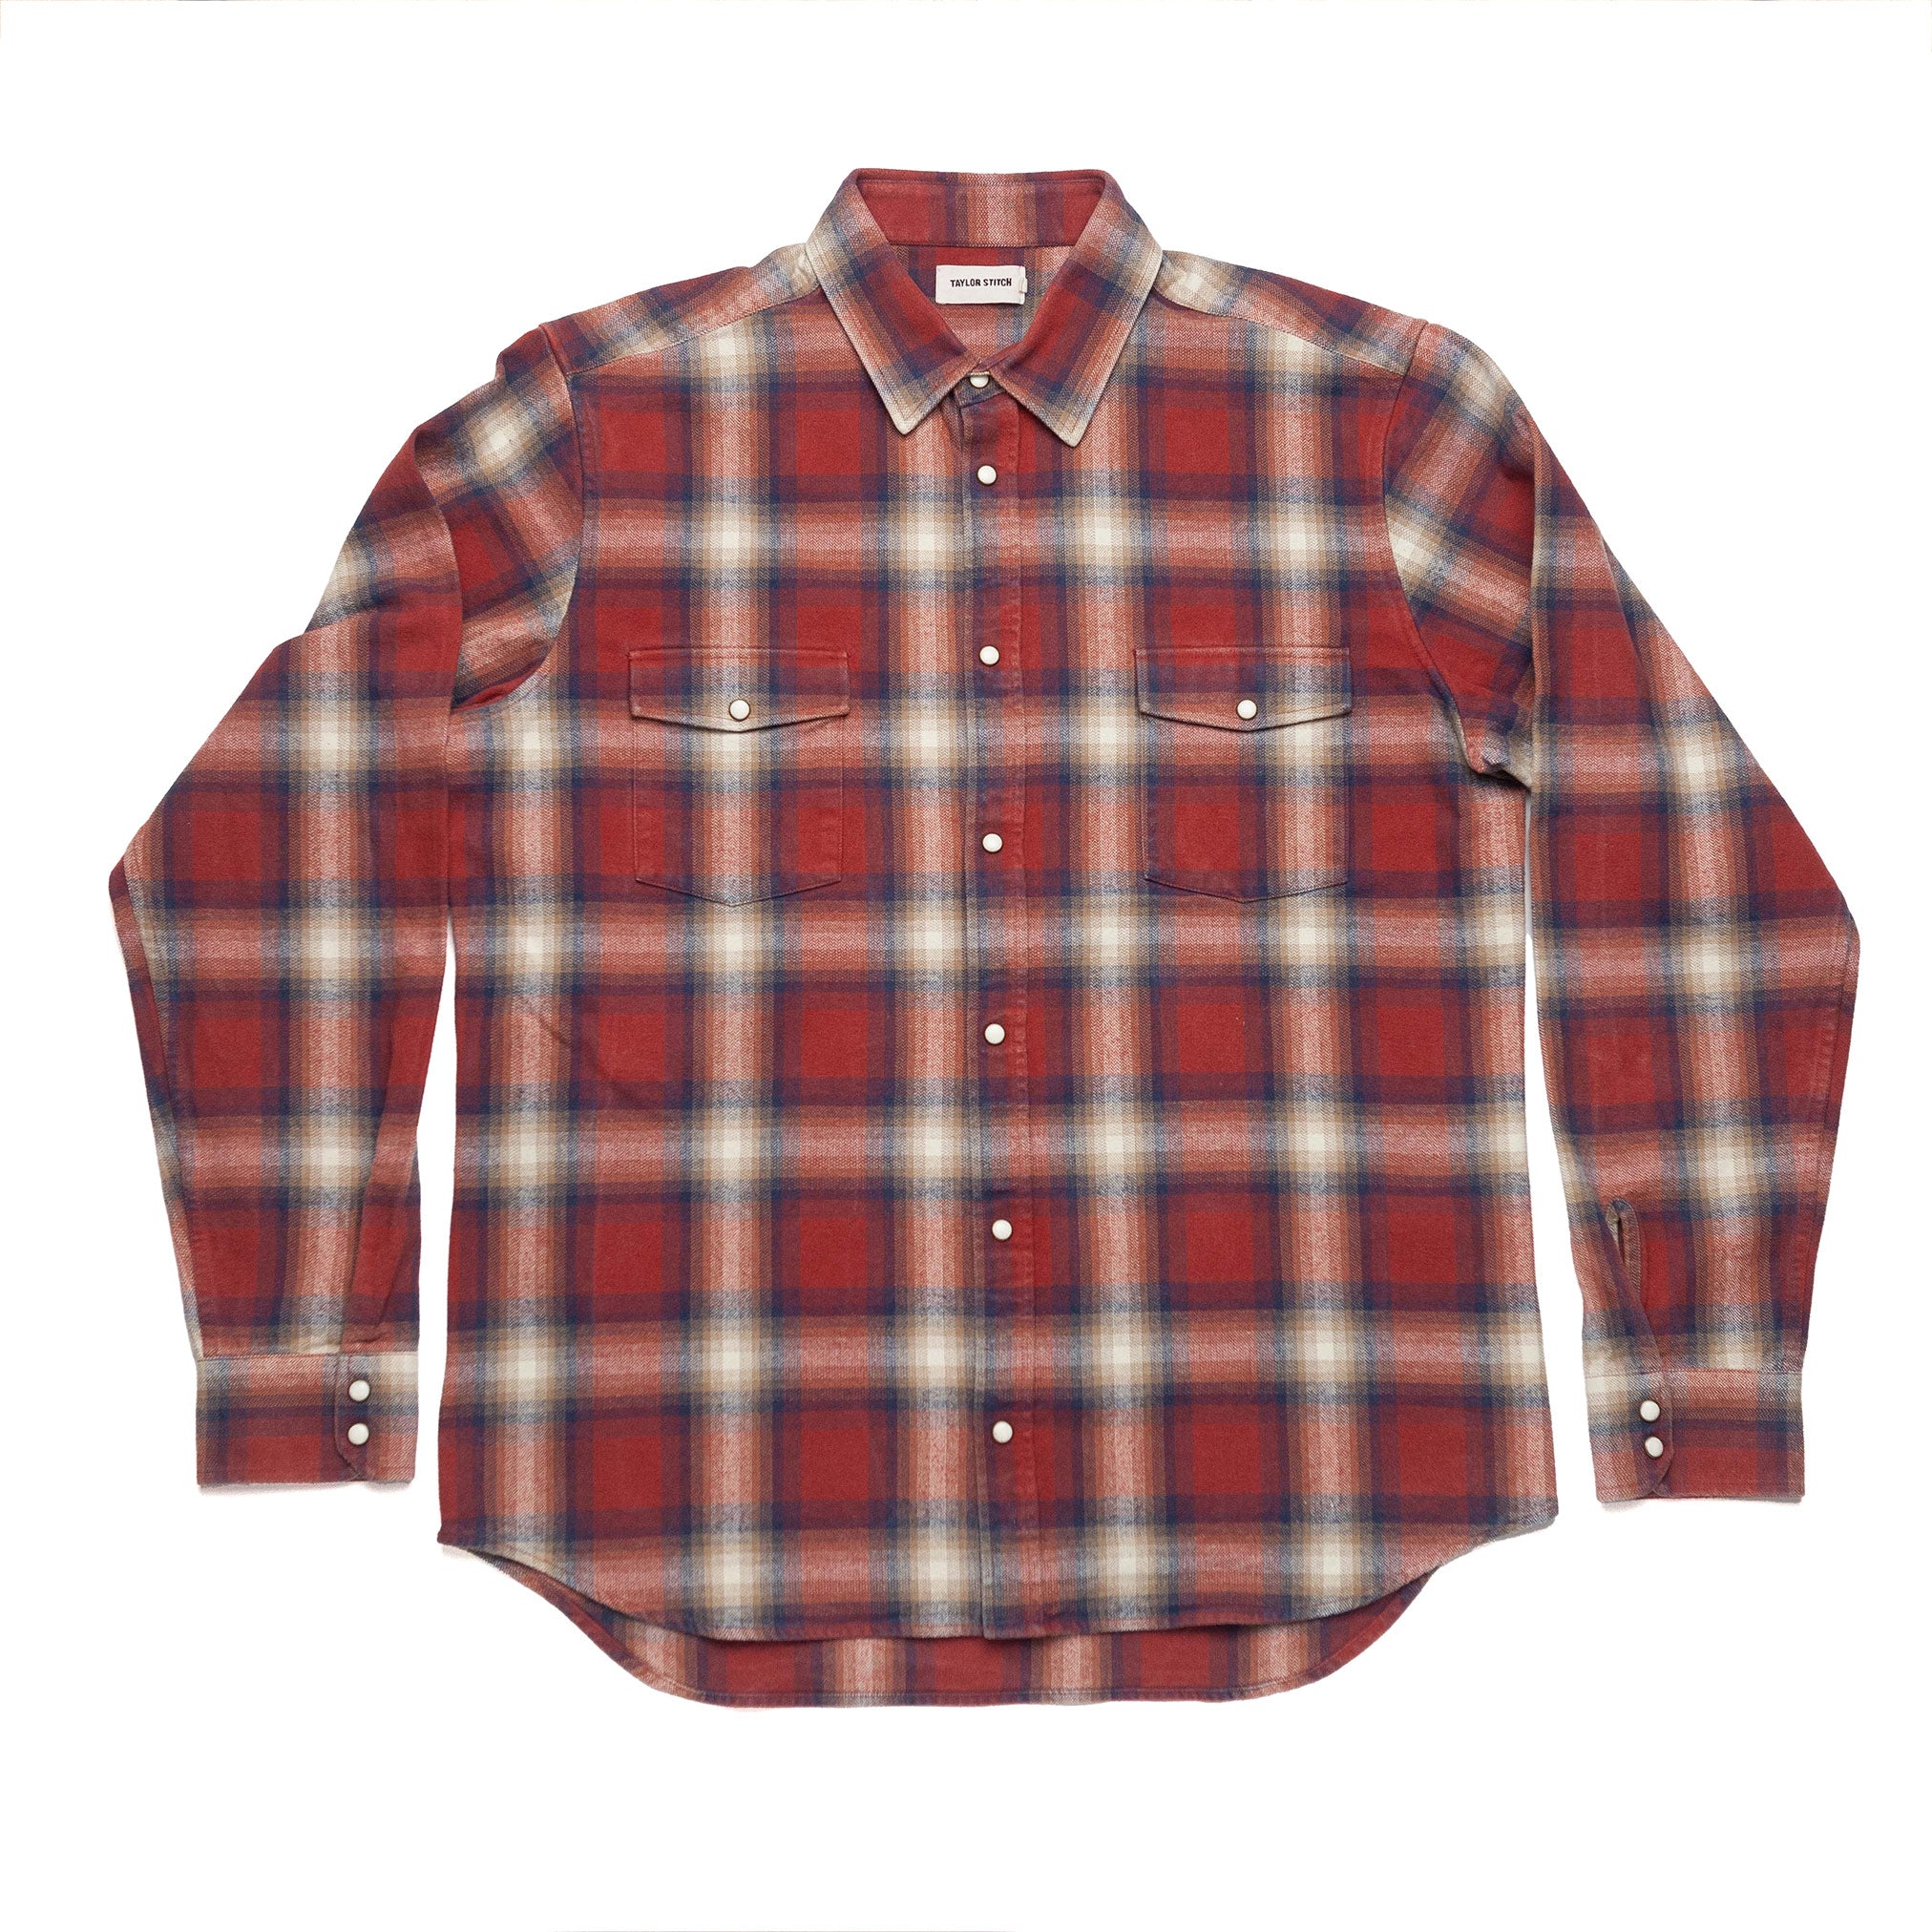 The Glacier Shirt in Red Plaid - 46